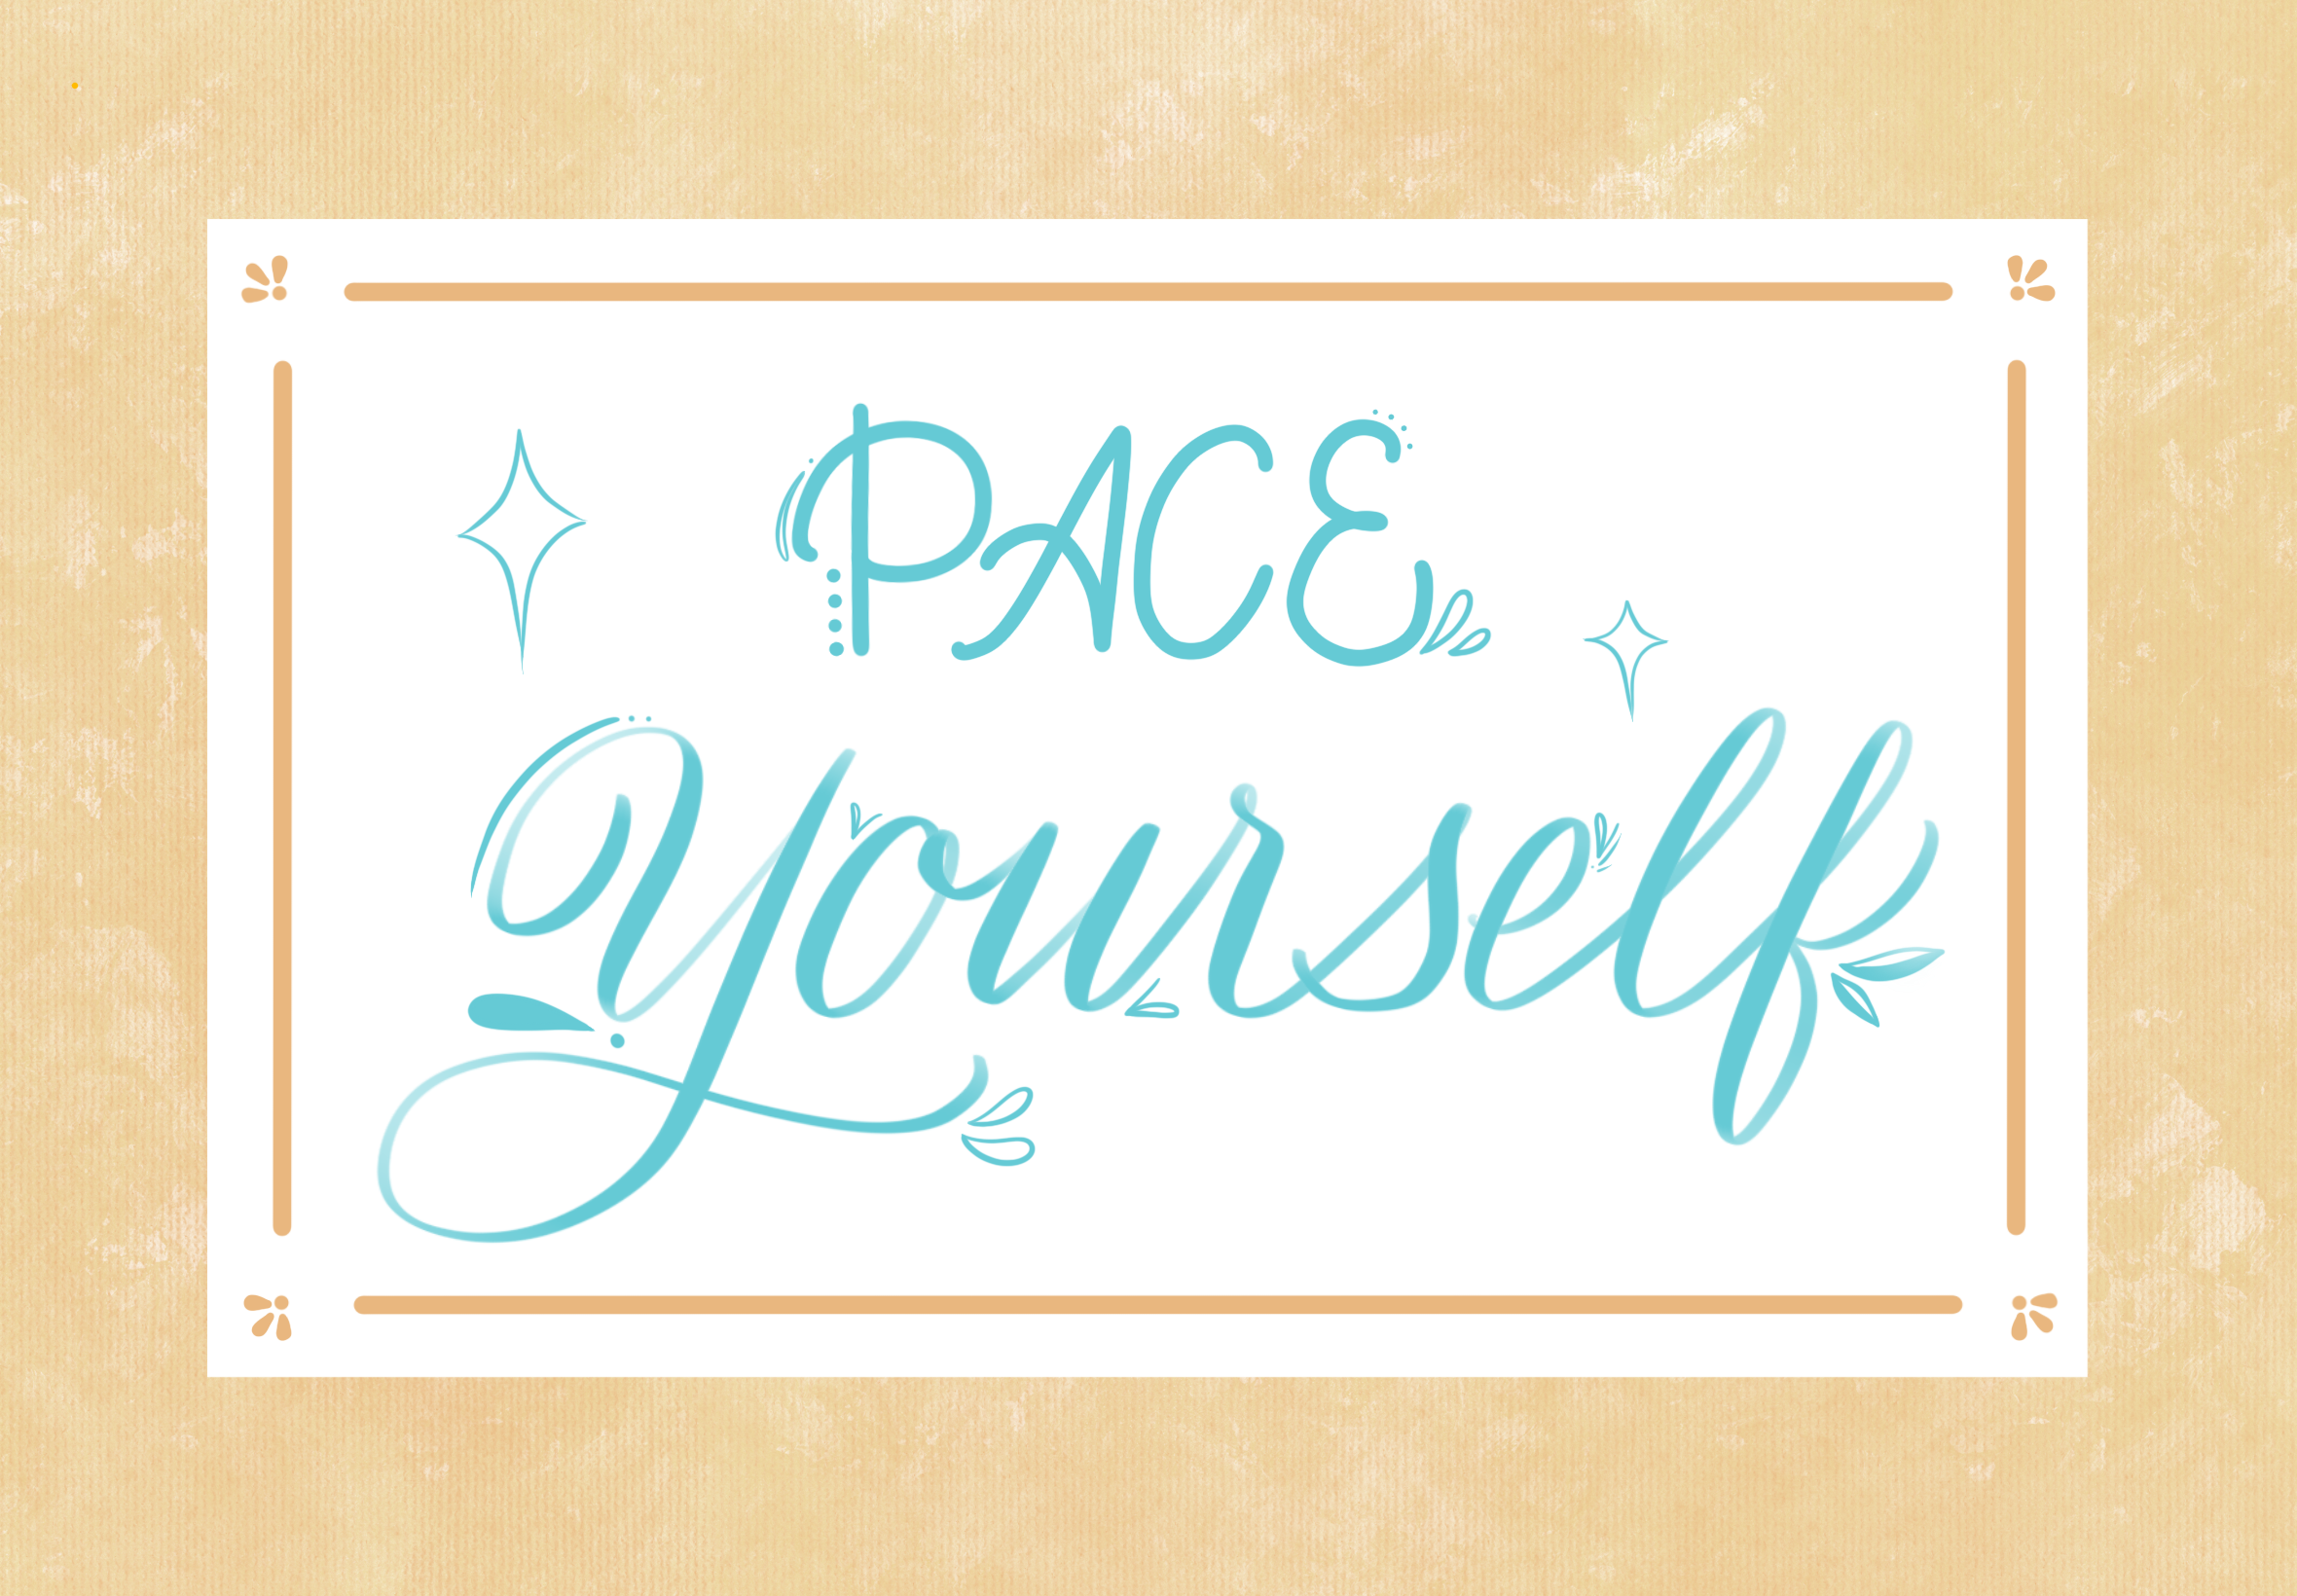 Pace Yourself